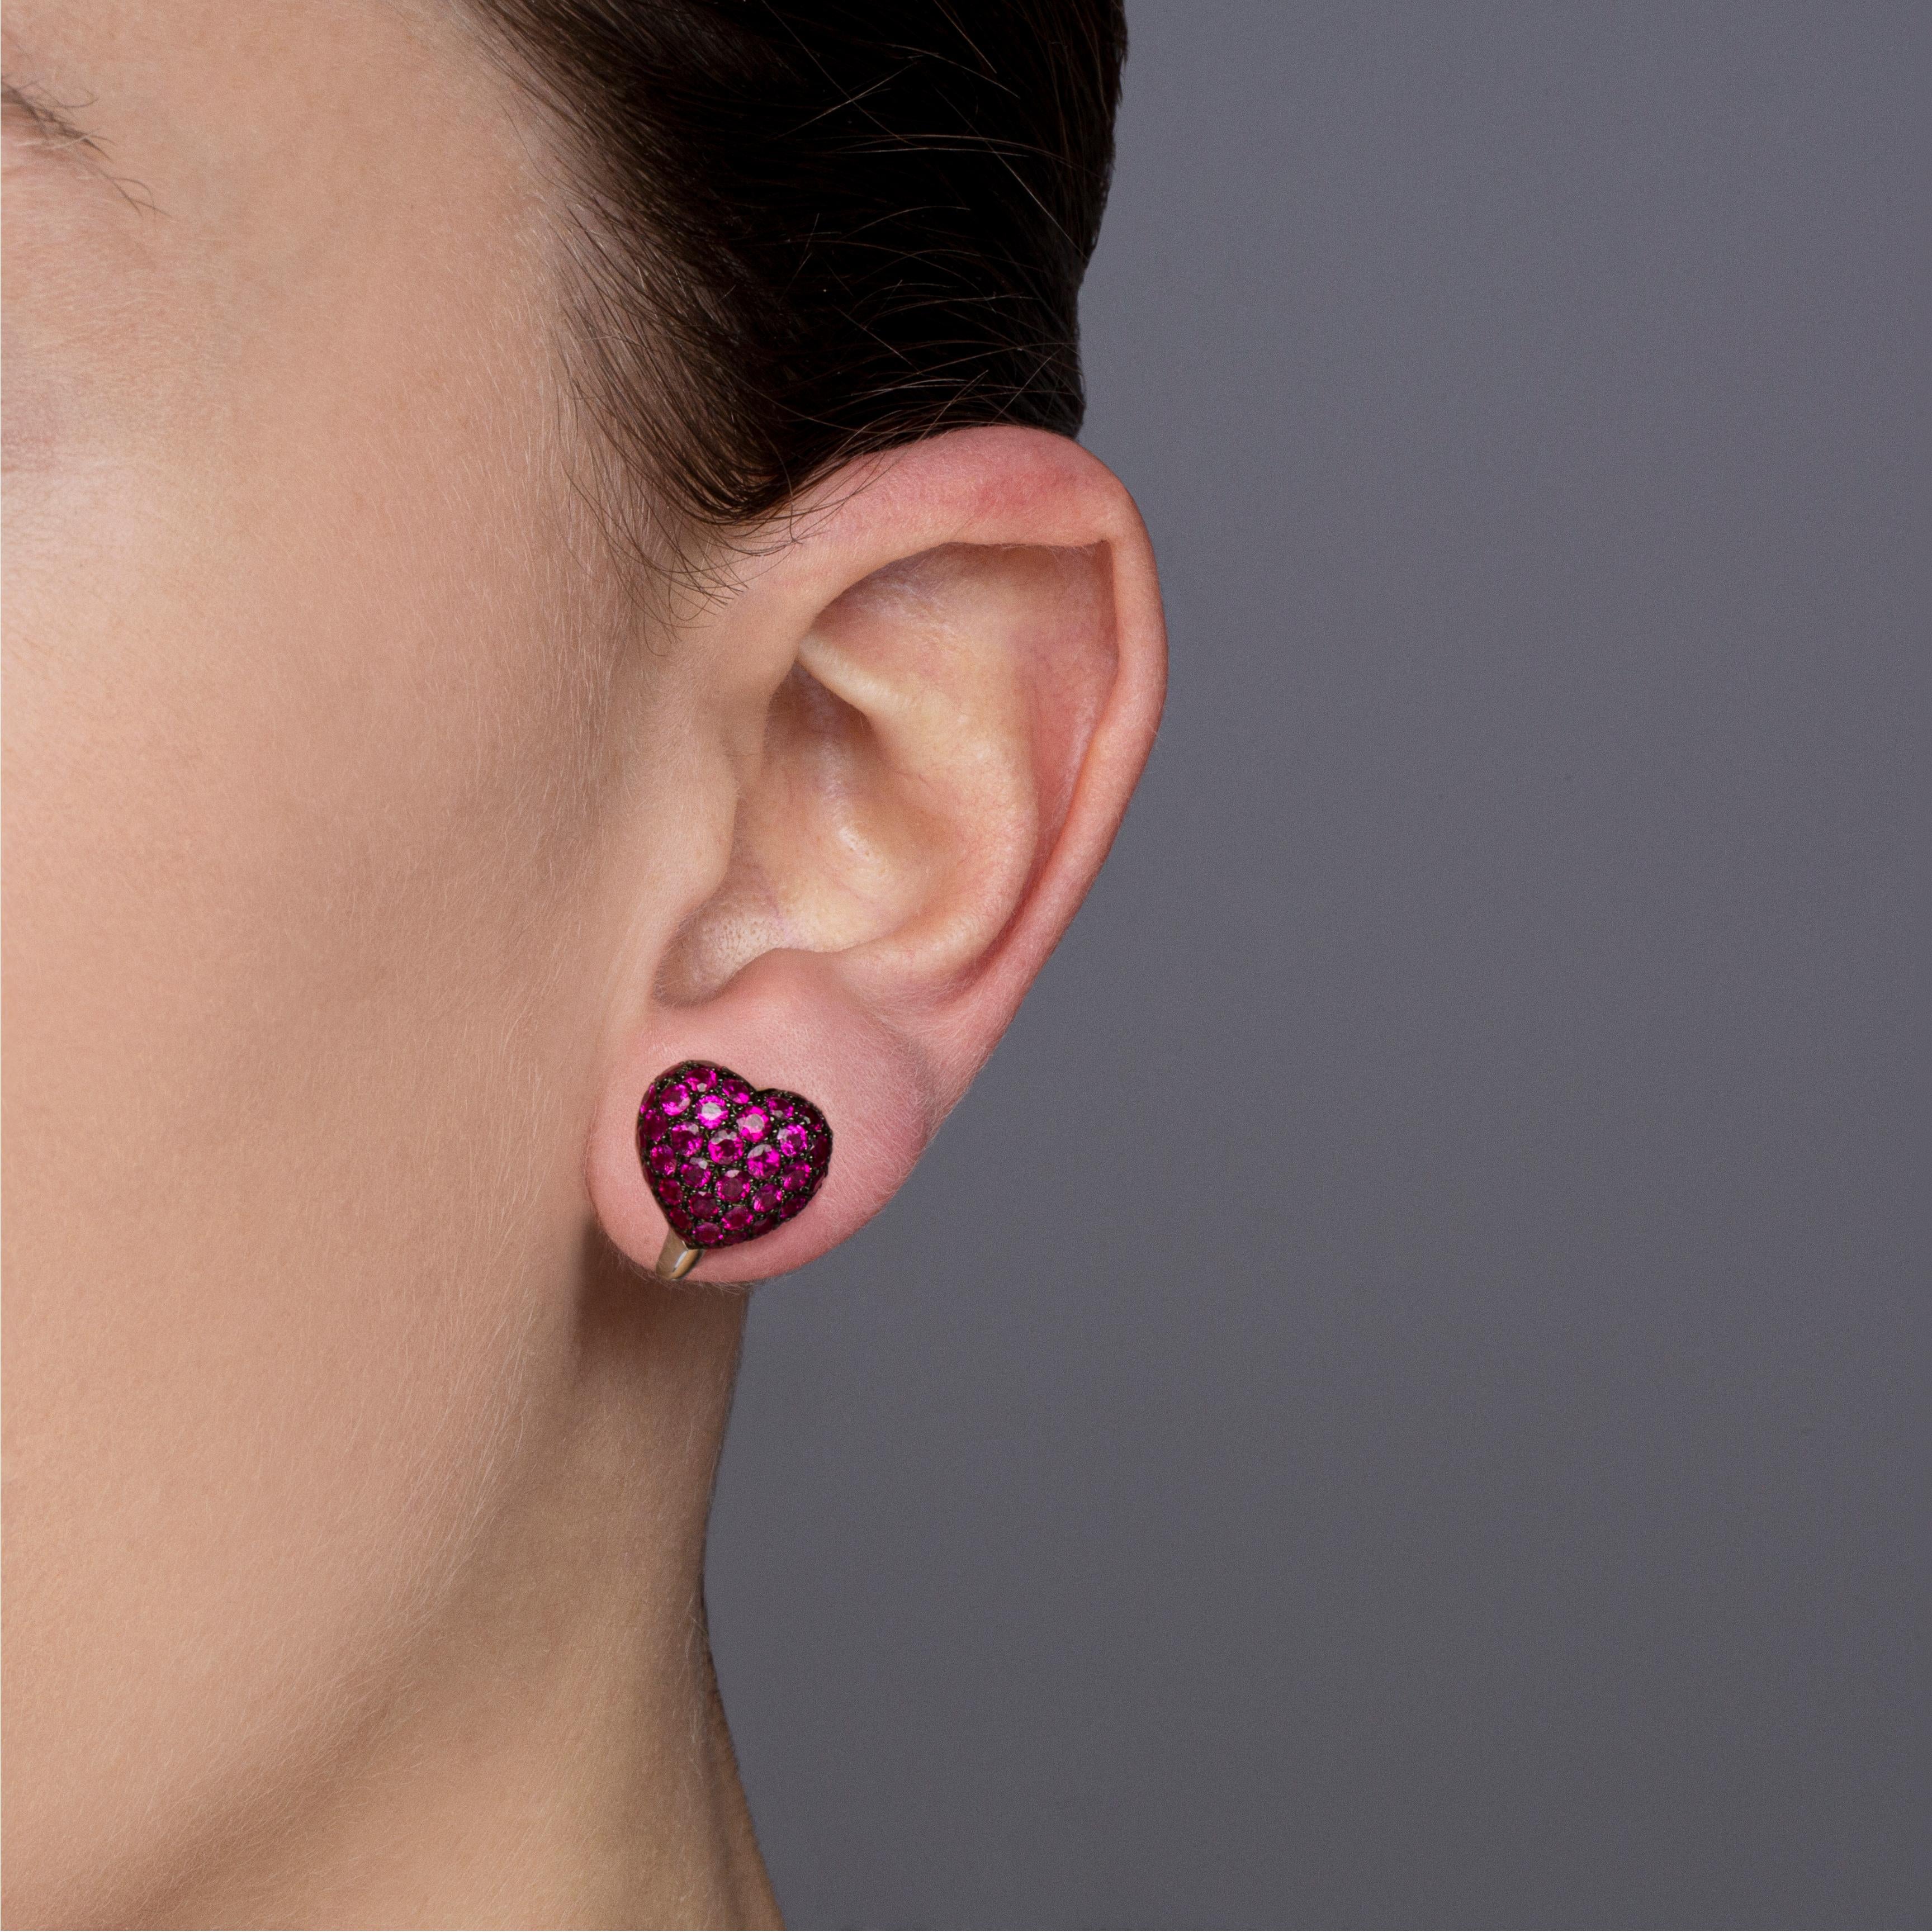 Alex Jona design collection, hand crafted in Italy, 18 karat white gold, bombé heart  clip-on earrings, set with 3.53 carats of Burmese Rubies, with dark rhodium setting.  
Dimensions : H 0.55 in x W 0.50 in x D 0.27 in - H 13.97 mm x W 12.7 mm X D